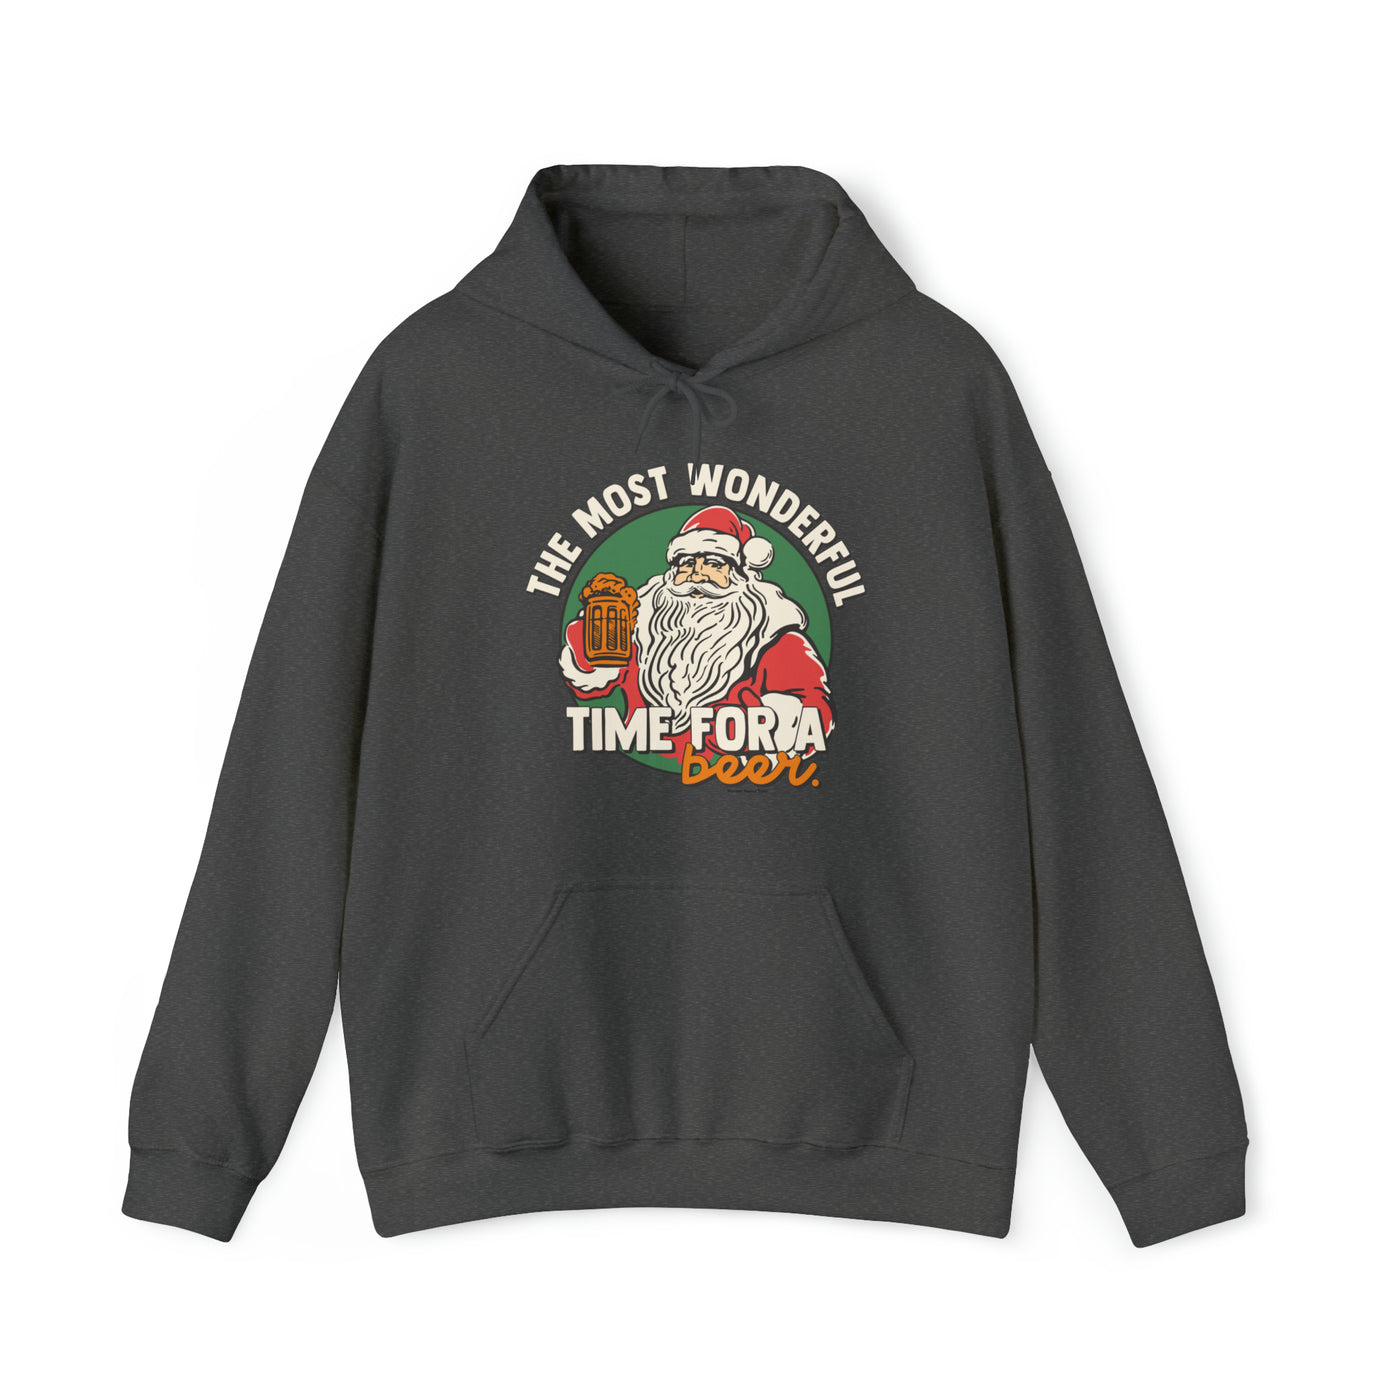 Most Wonderful time for a Beer Hoodie